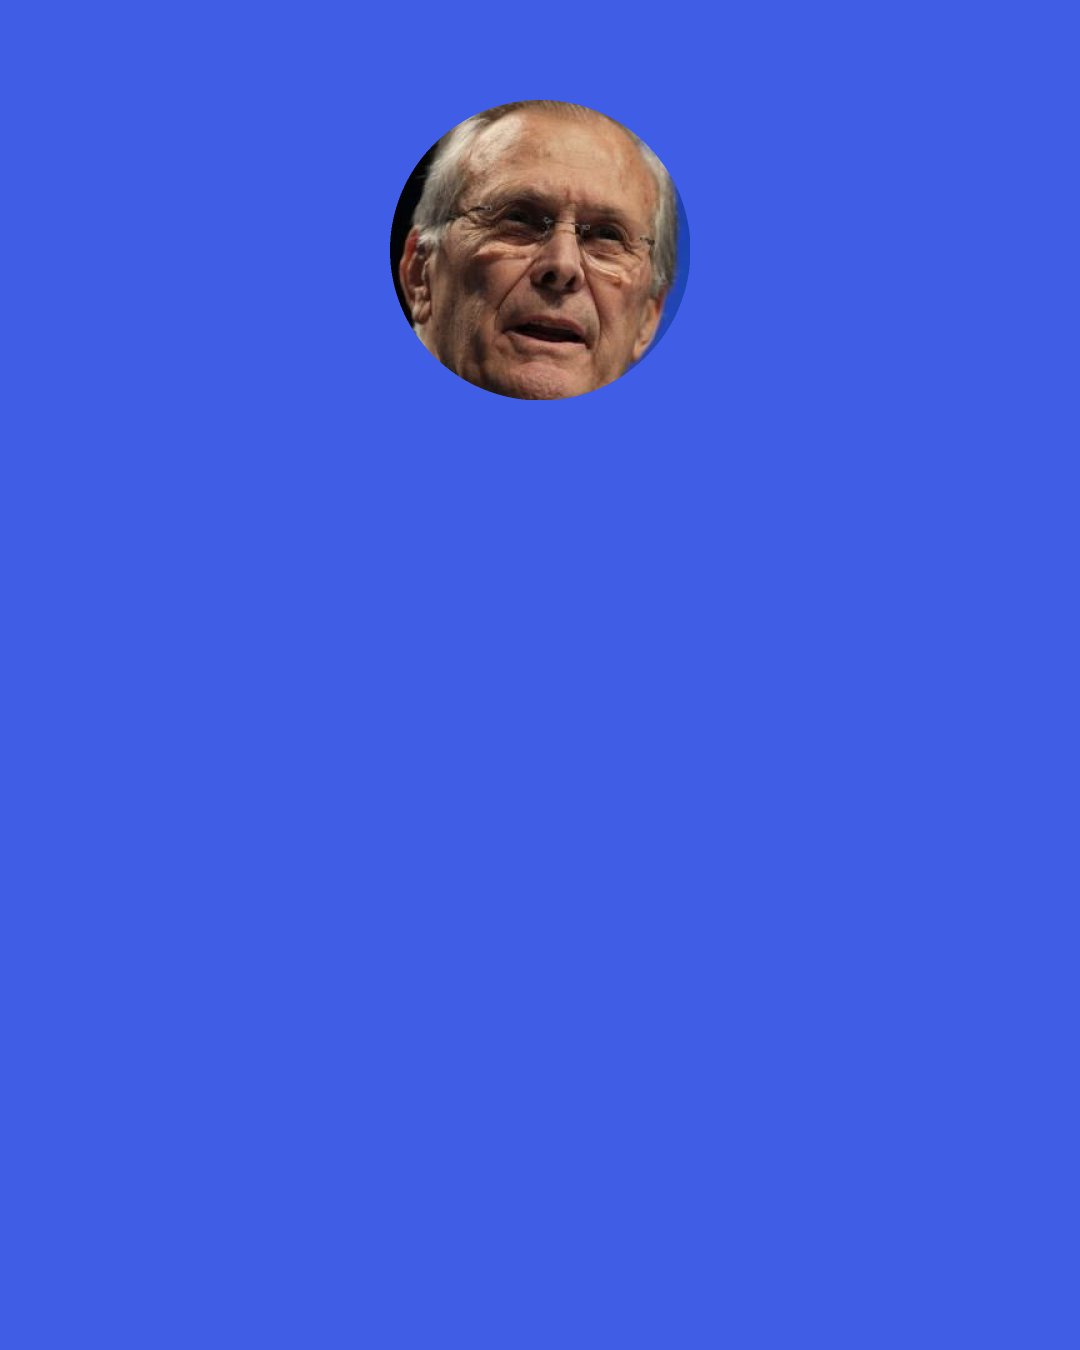 Donald Rumsfeld: Don't divide the world into "them" and "us."